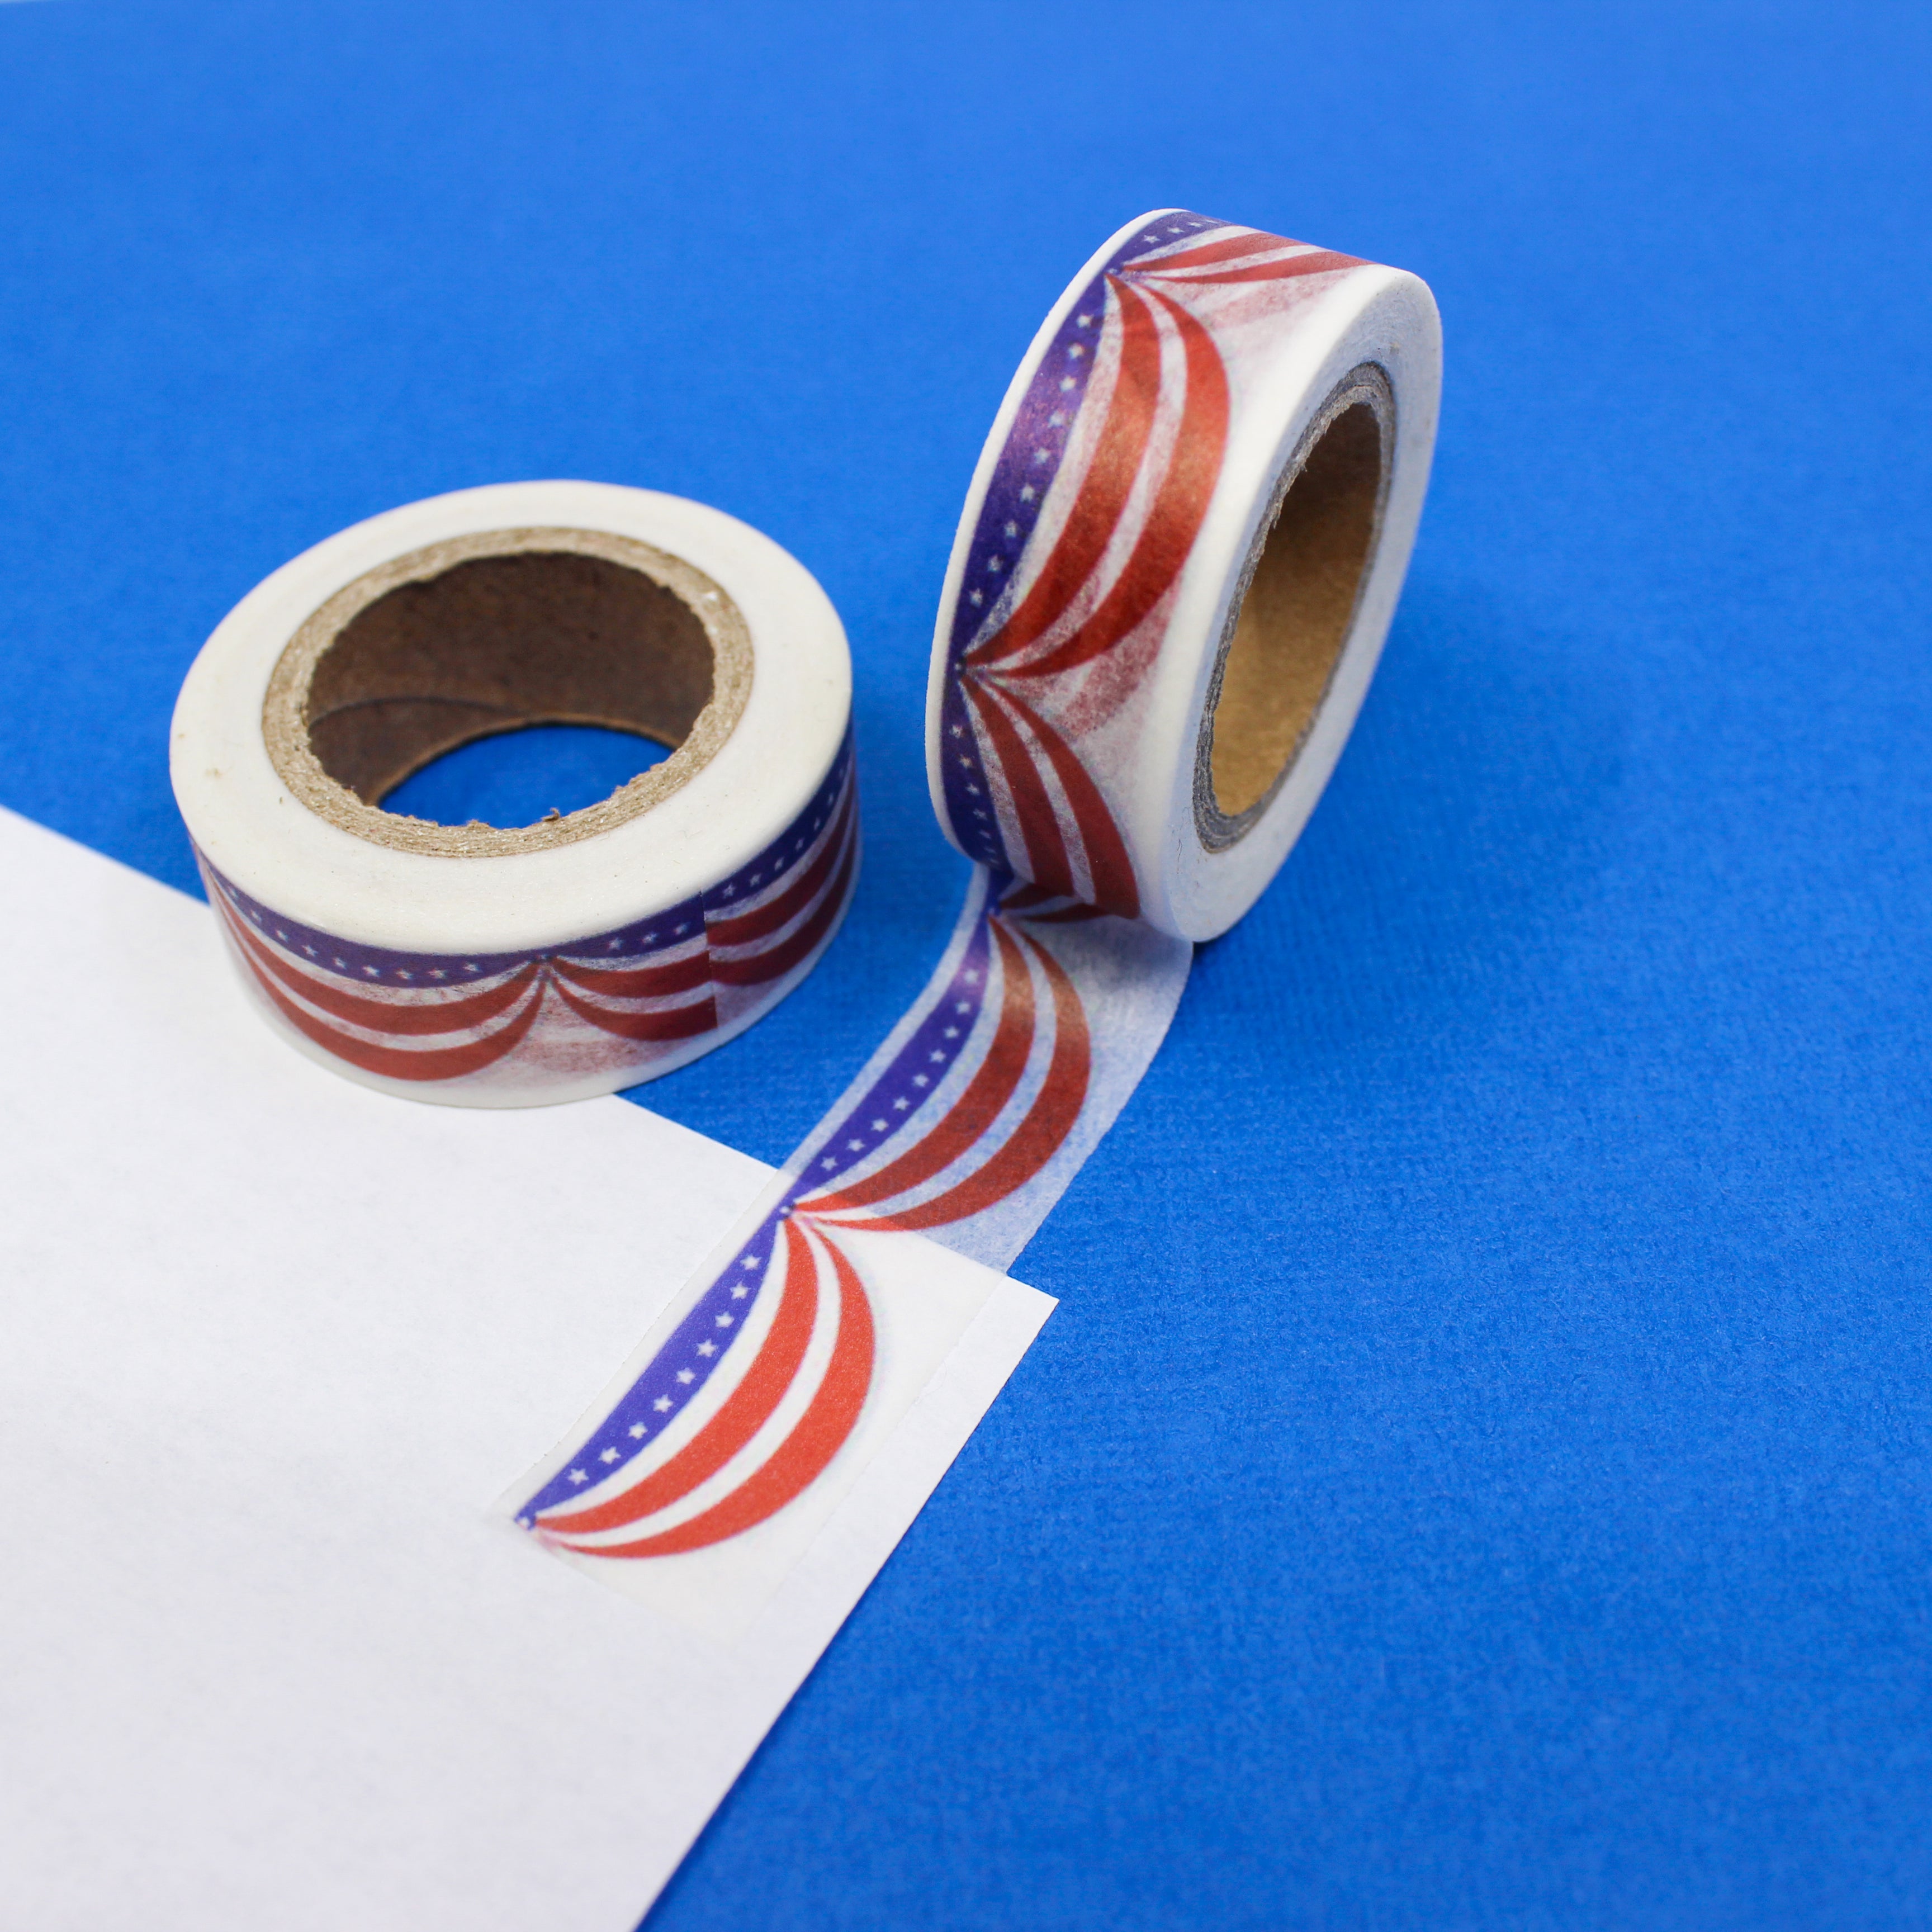 This is red and blue scalloped American flag pattern Washi Tape from BBB Supplies Craft Shop